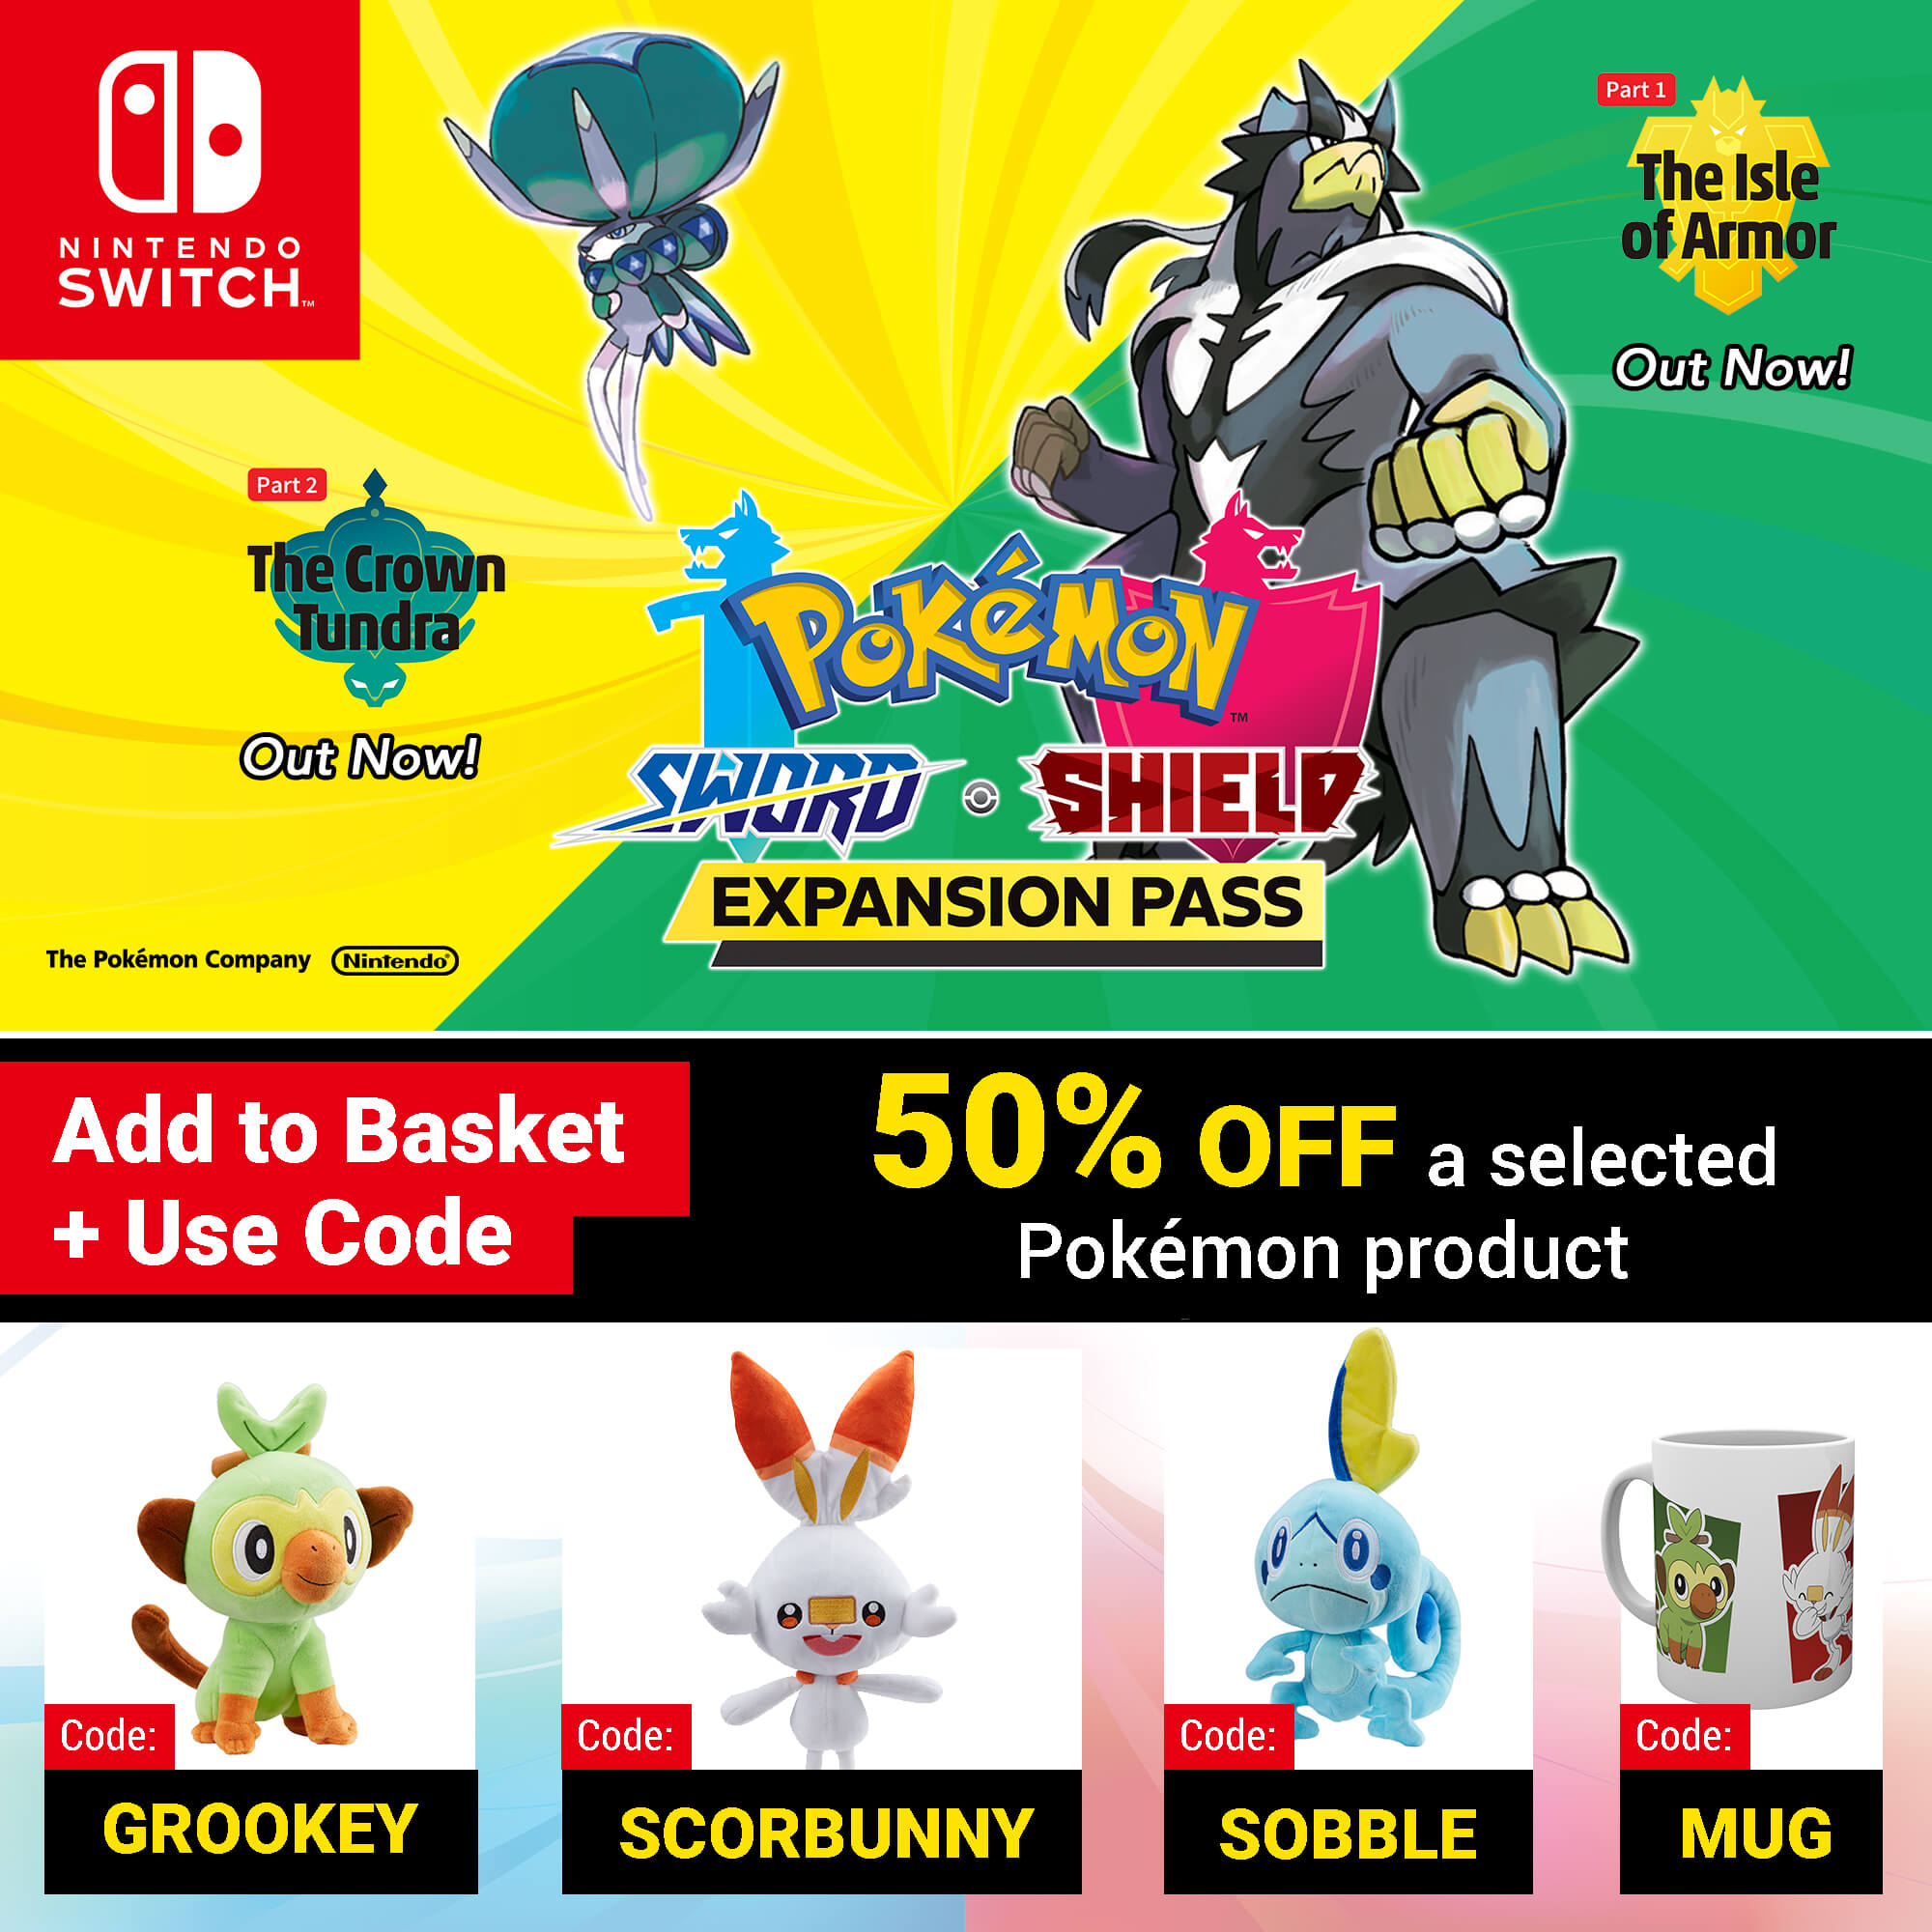 Pokemon Sword And Pokemon Shield Expansion Pass With 50 Off A Selected Pokemon Product Add Items And Use Code At The Basket Nintendo Official Uk Store